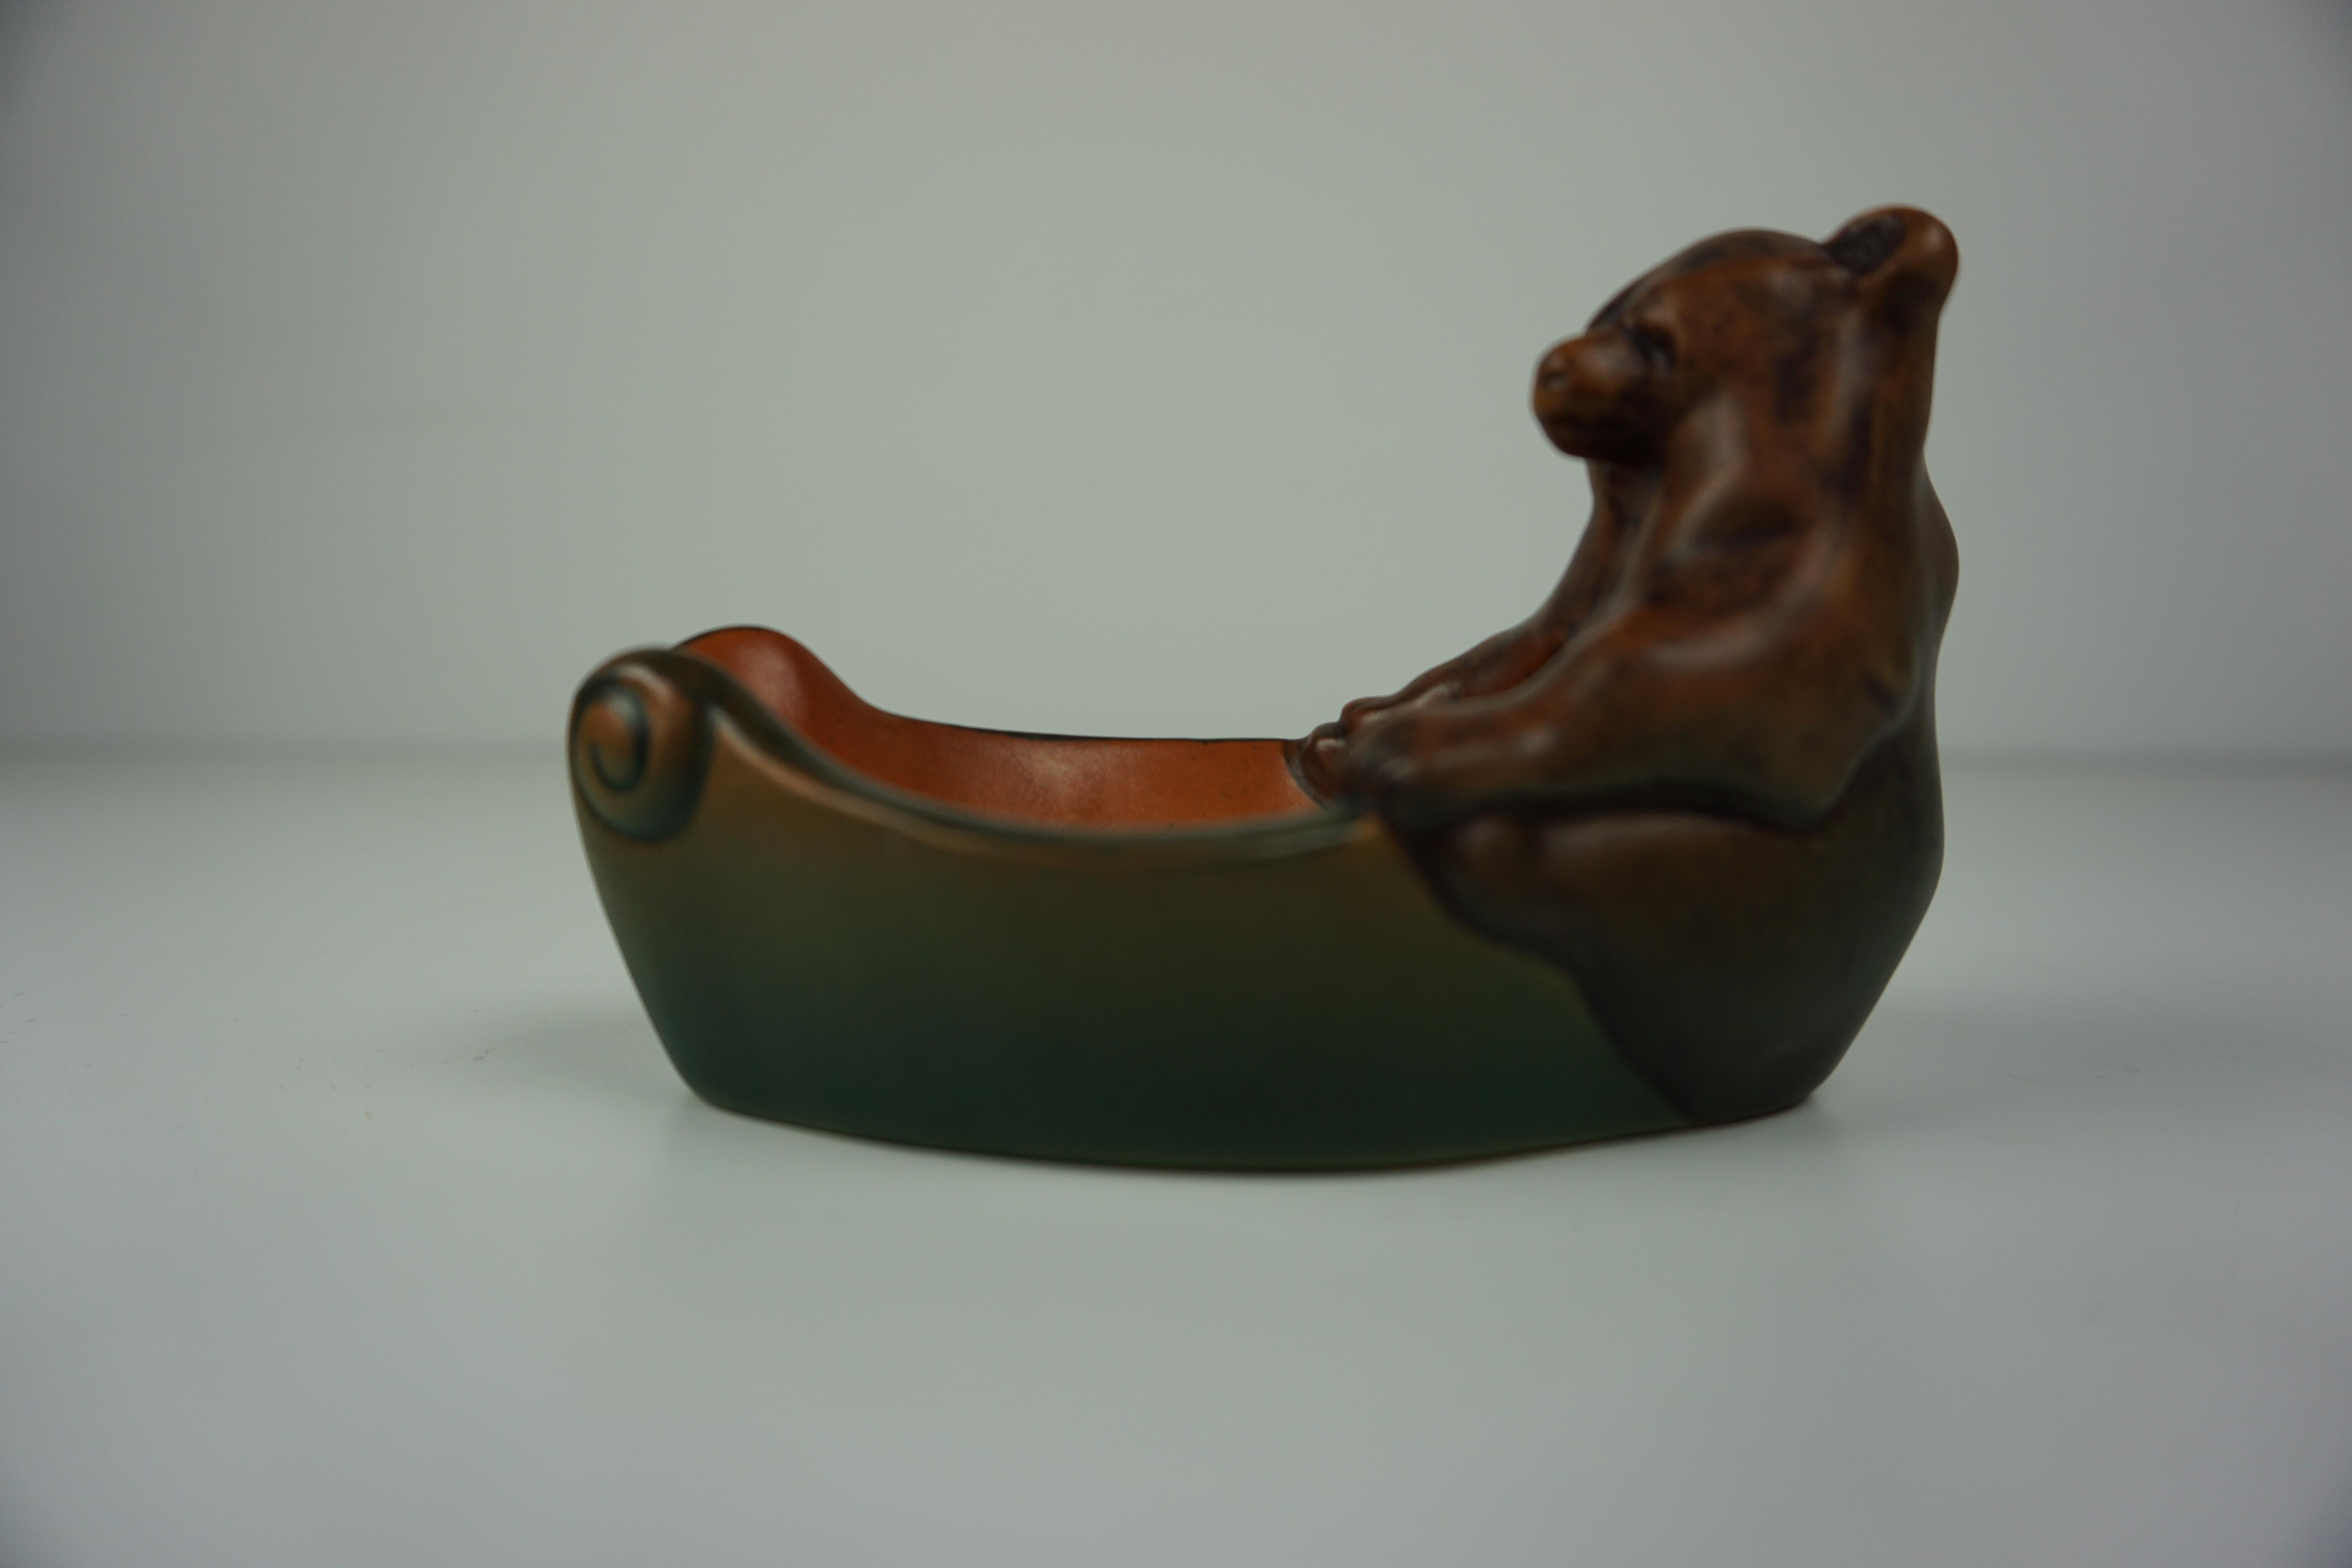 Danish hand-crafted art nouveau ash tray / bowl by D. Boolsen for P. Ipsens Enke in 1927.

The art nuveau ash tray / pibeholder / bowl feature a well made lively small brown bear and is in excellent condition.

Ipsens Enke (1843 - 1955) was a very